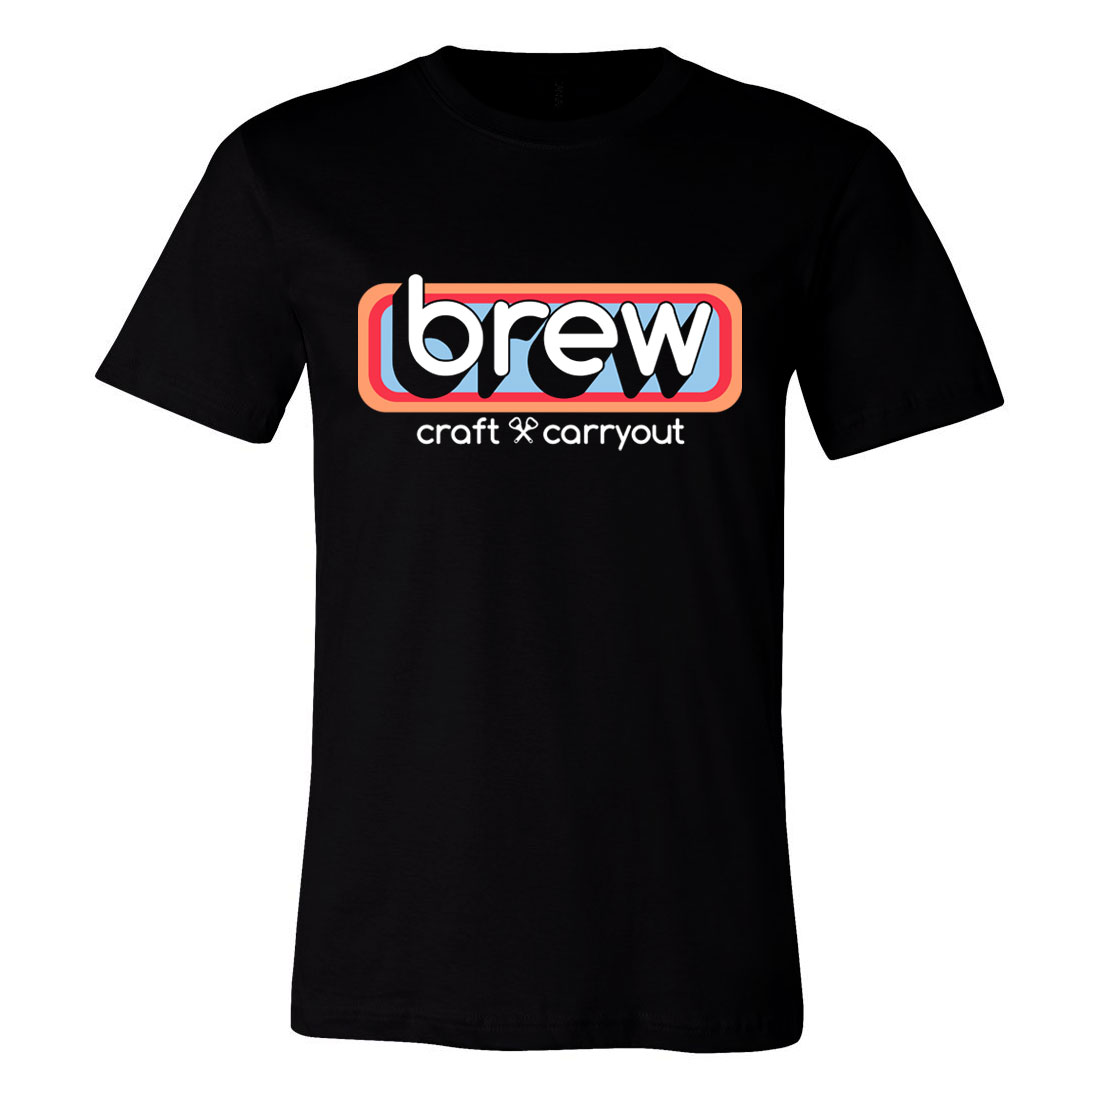 Craft & Carryout Brew Tee